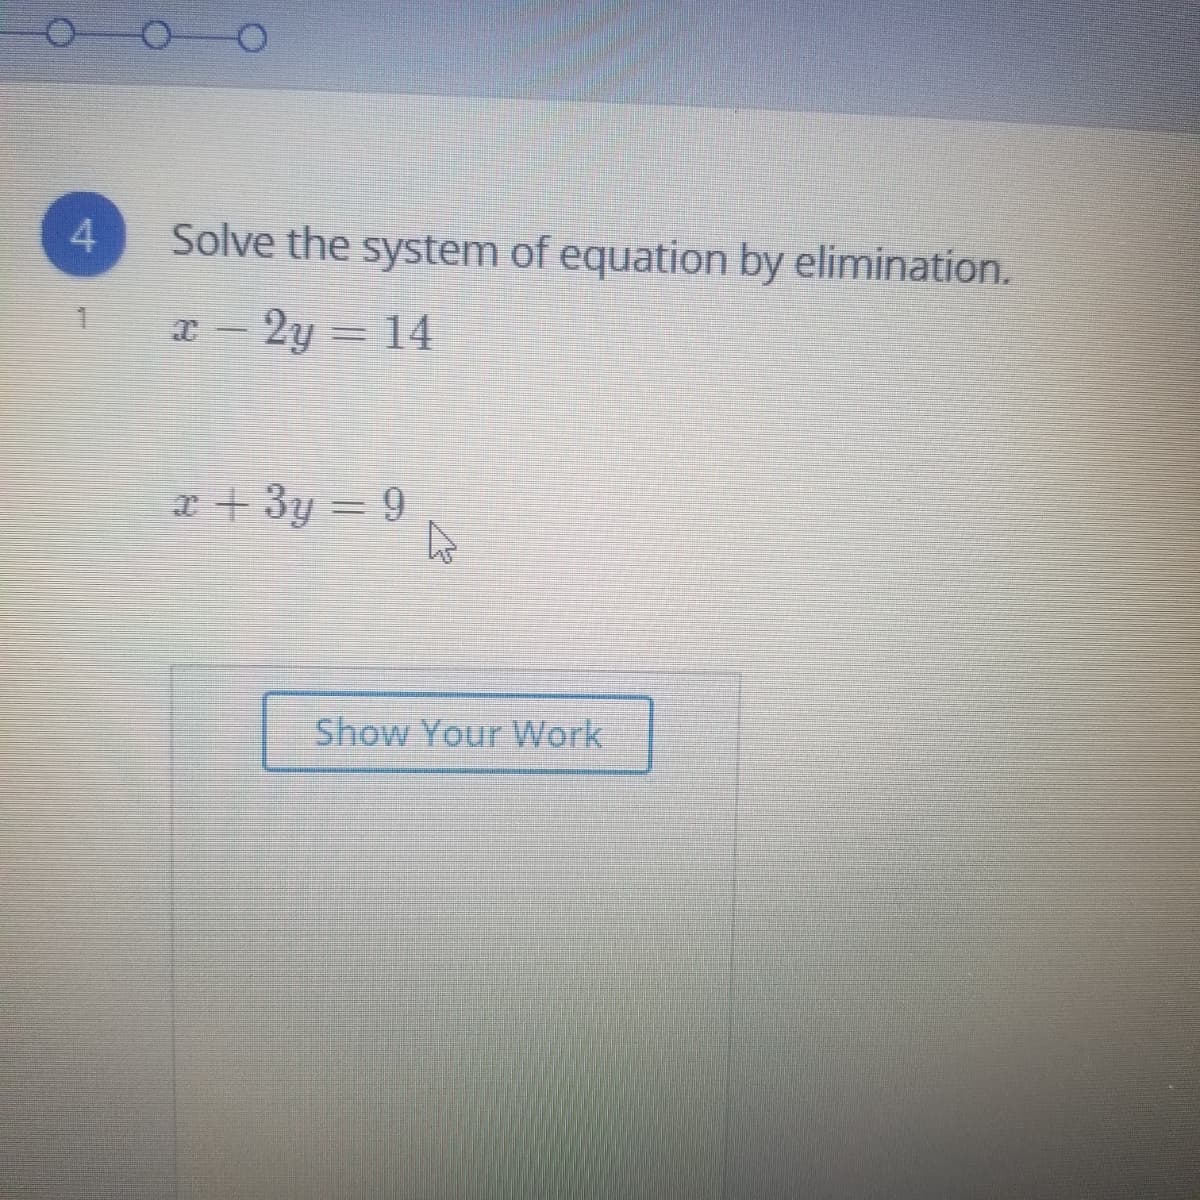 4.
Solve the system of equation by elimination.
- 2y = 14
a + 3y = 9
Show Your Work
